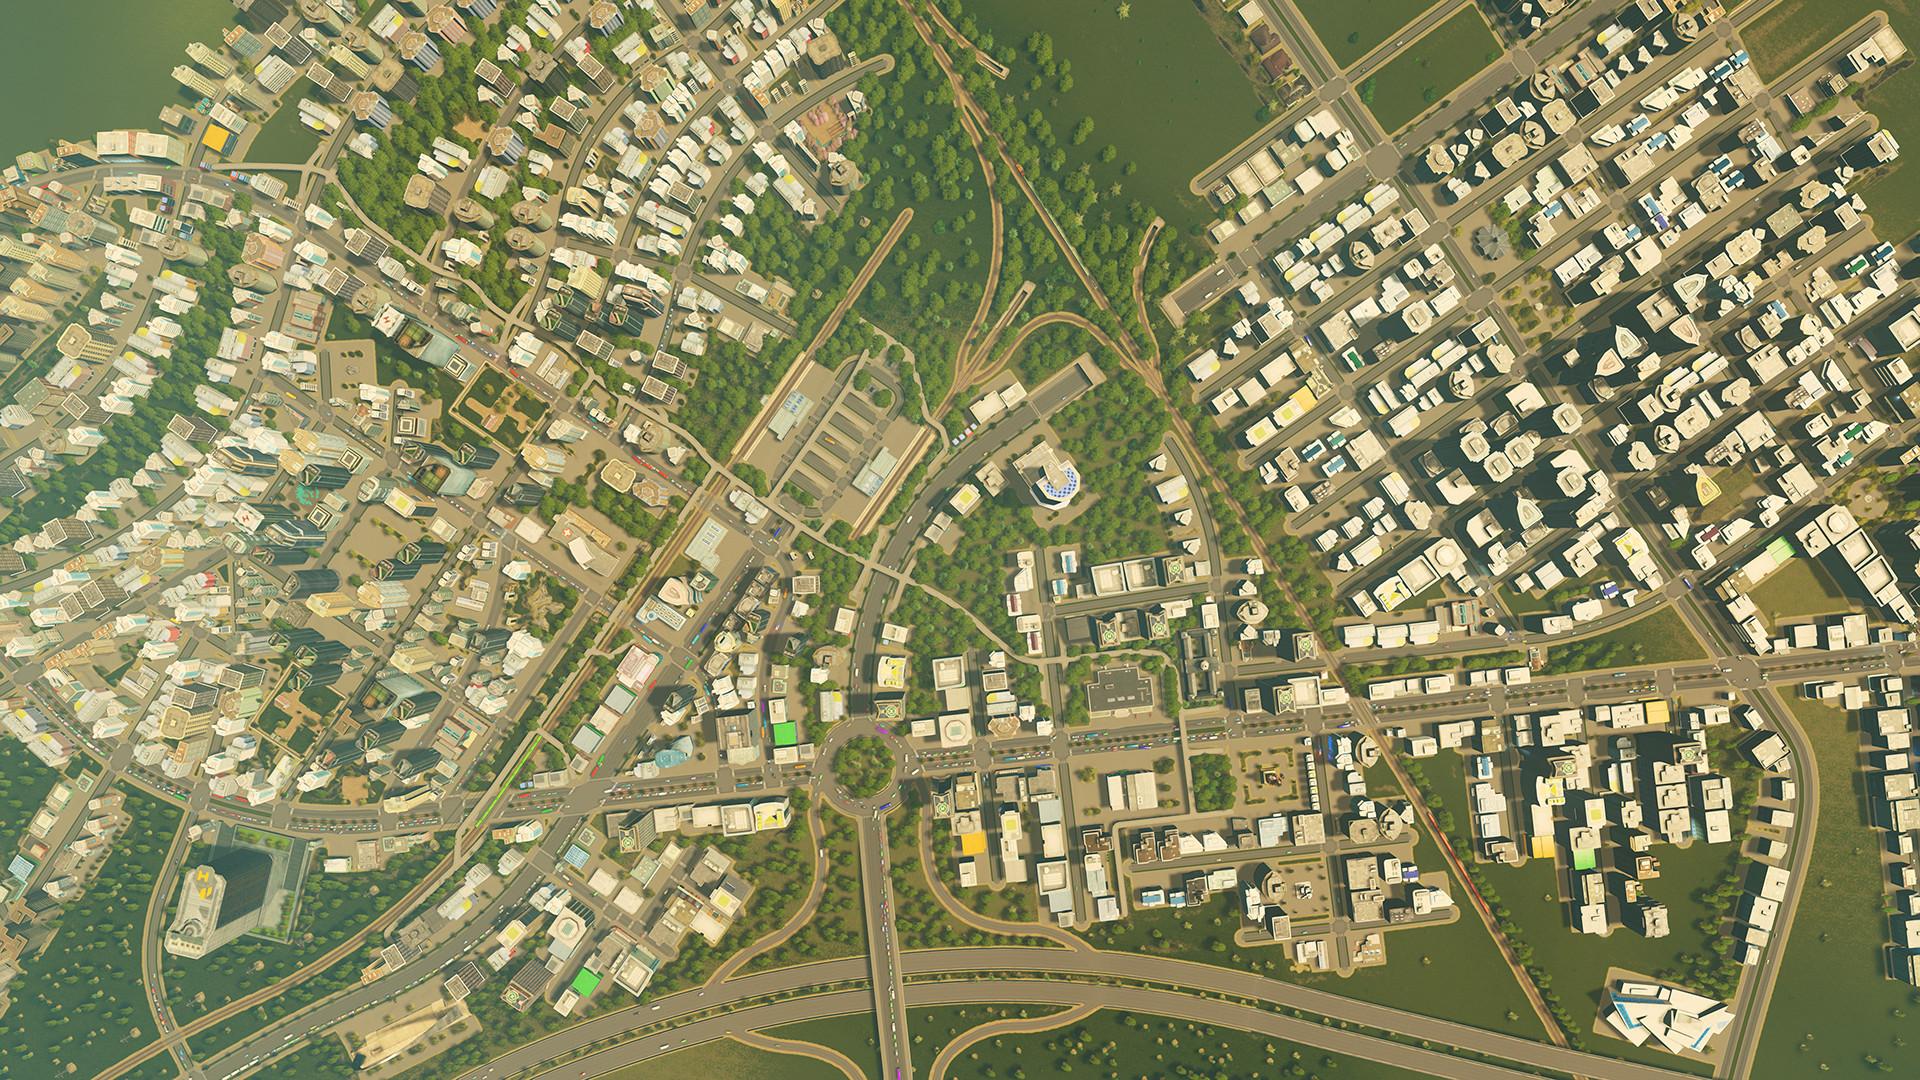 Screenshot №2 from game Cities: Skylines